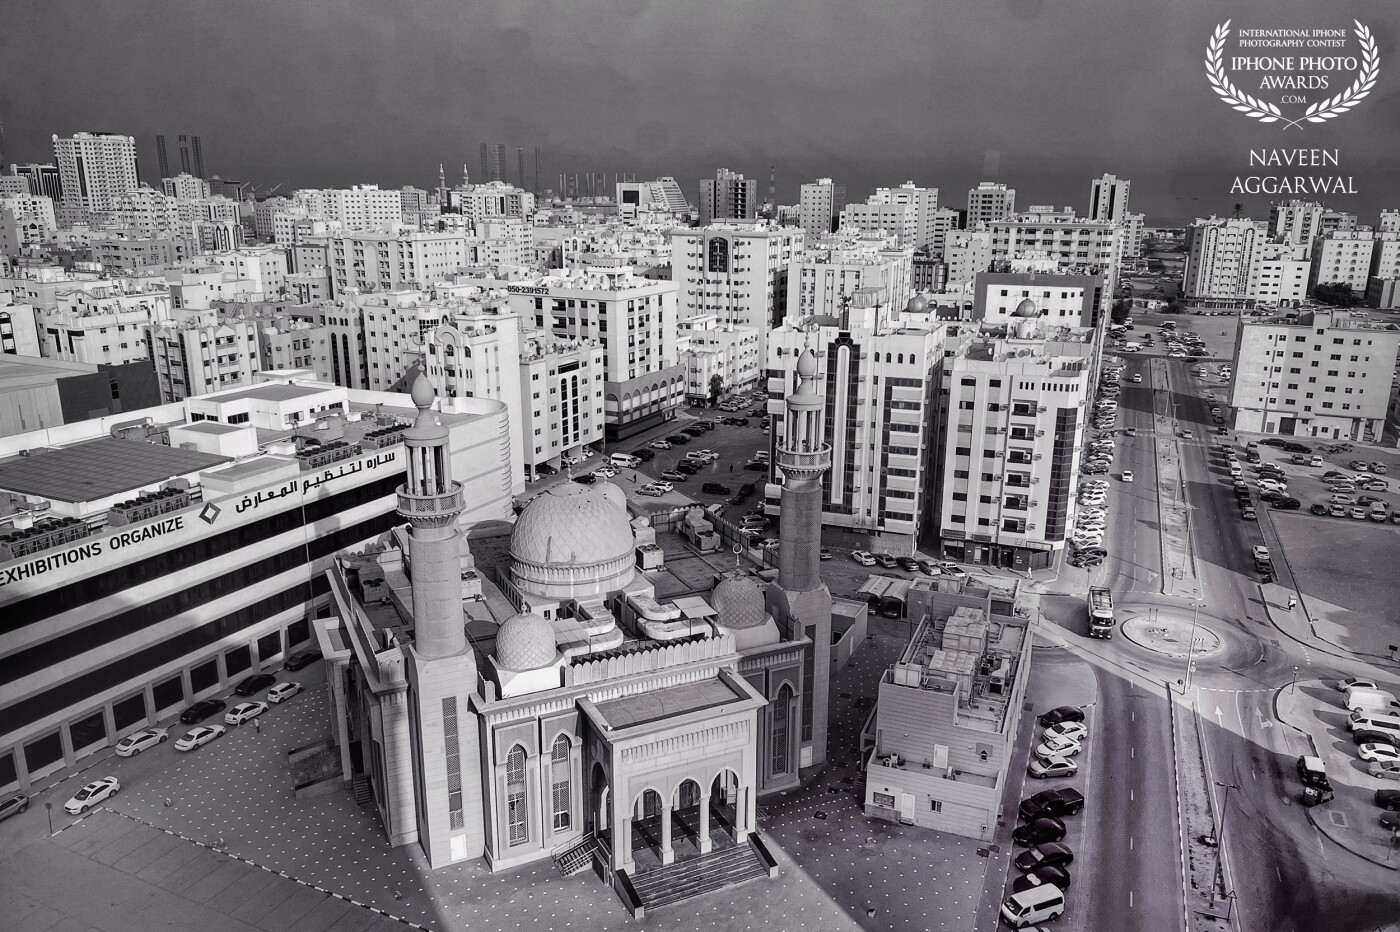 Aerial view and especially city view in black and white amazes me always . This is a beautiful shot of Sharjah creek from the rooftop of one high rise building in Sharjah , UAE